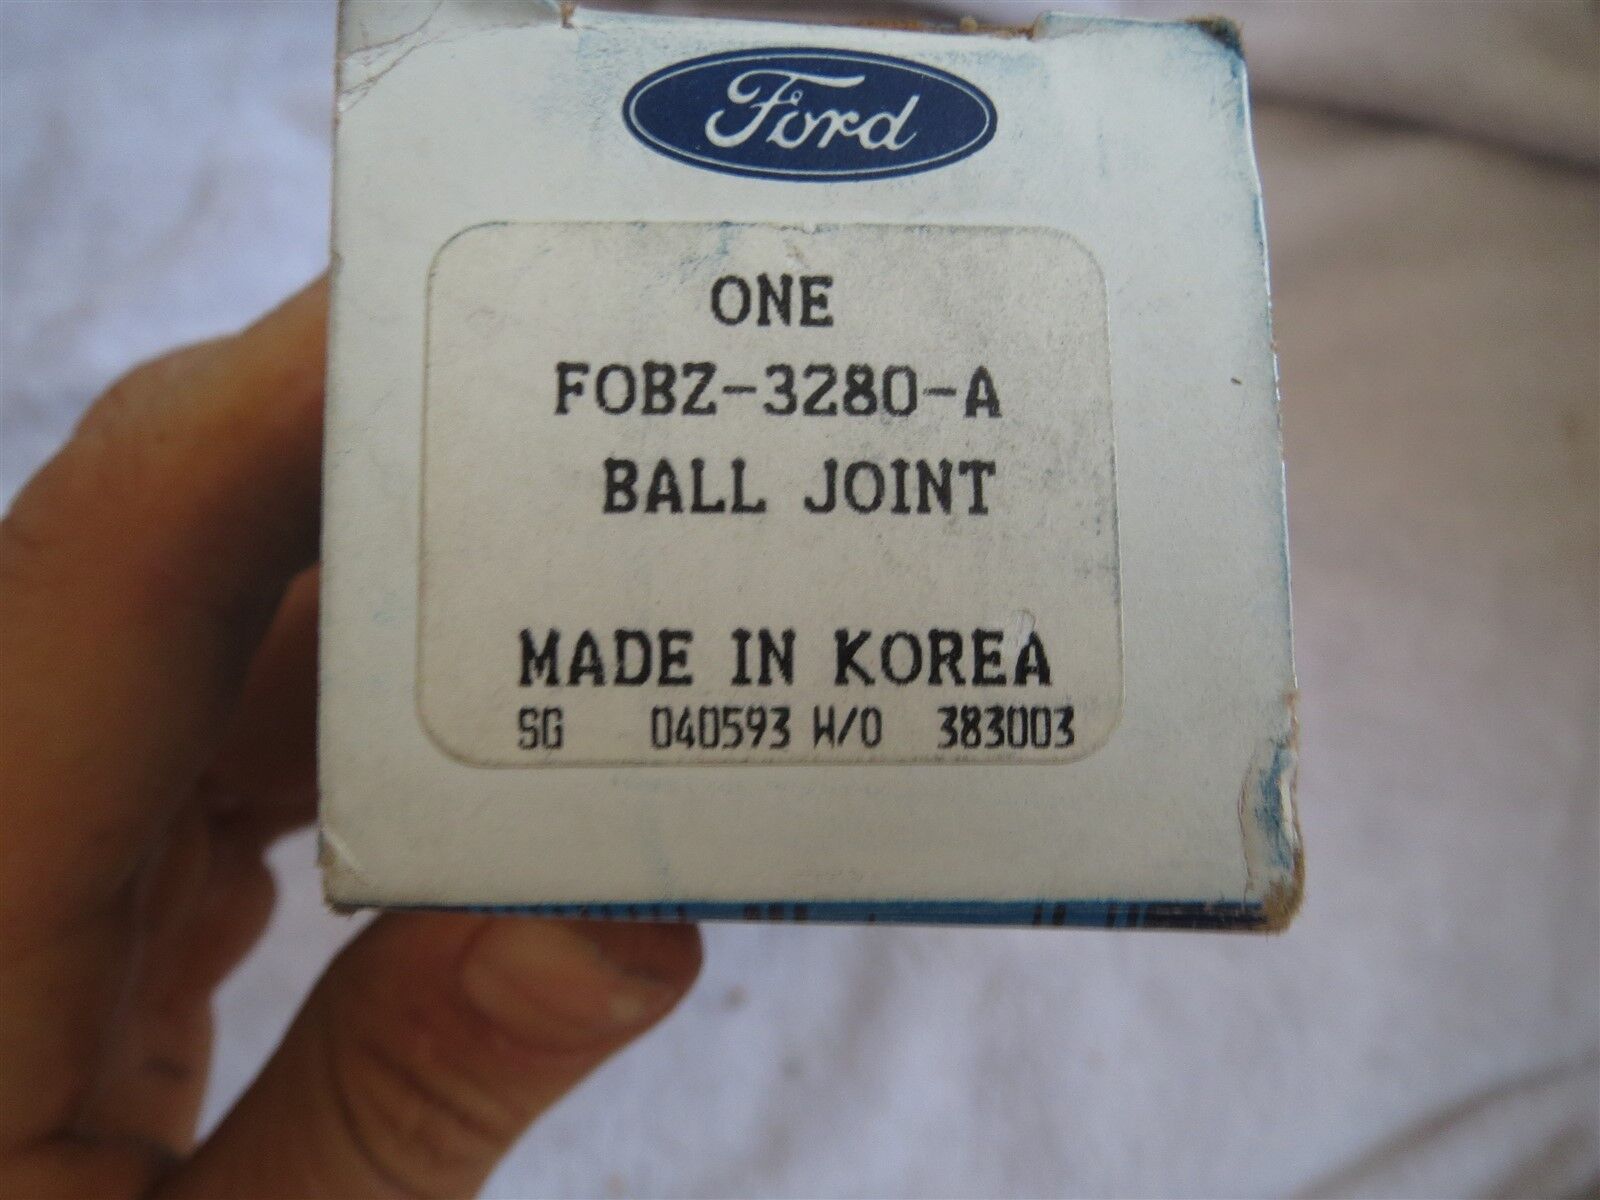 NOS 1990 - 1993 FORD FESTIVA FRONT SPINDLE CONNECTING ROD ASSEMBLY F0BZ-3280-A